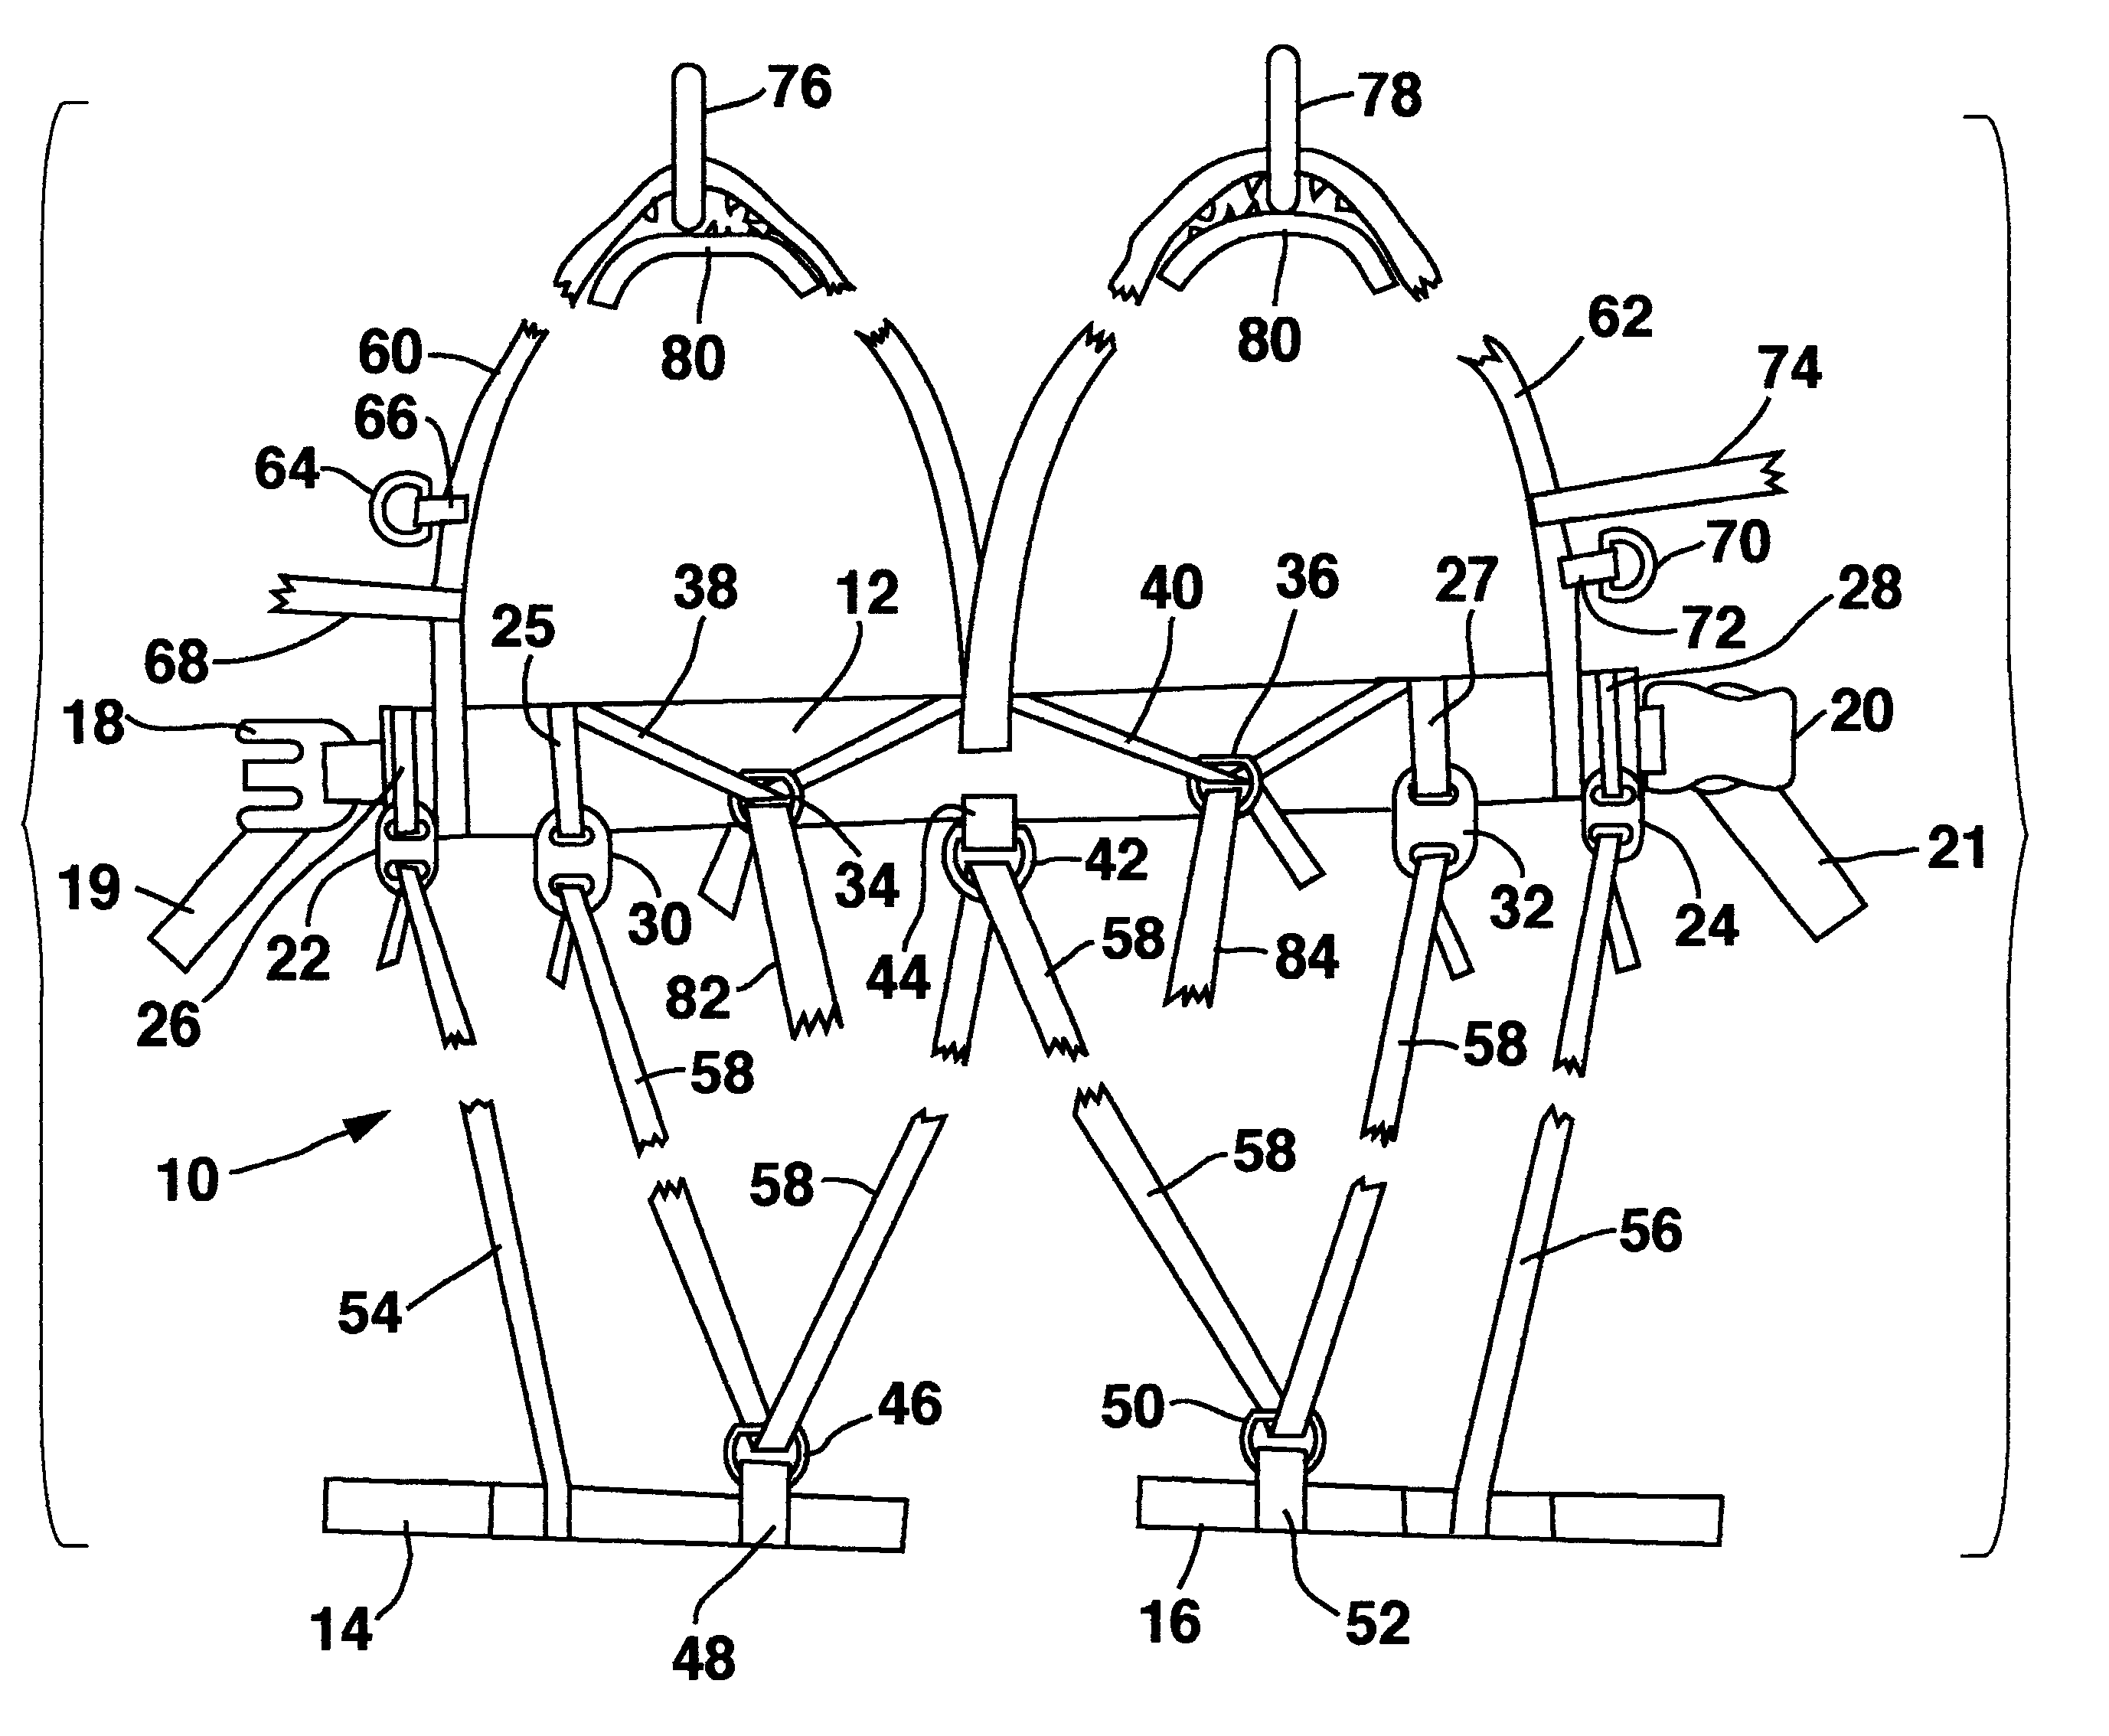 Exercise harness for use with unweighting apparatus